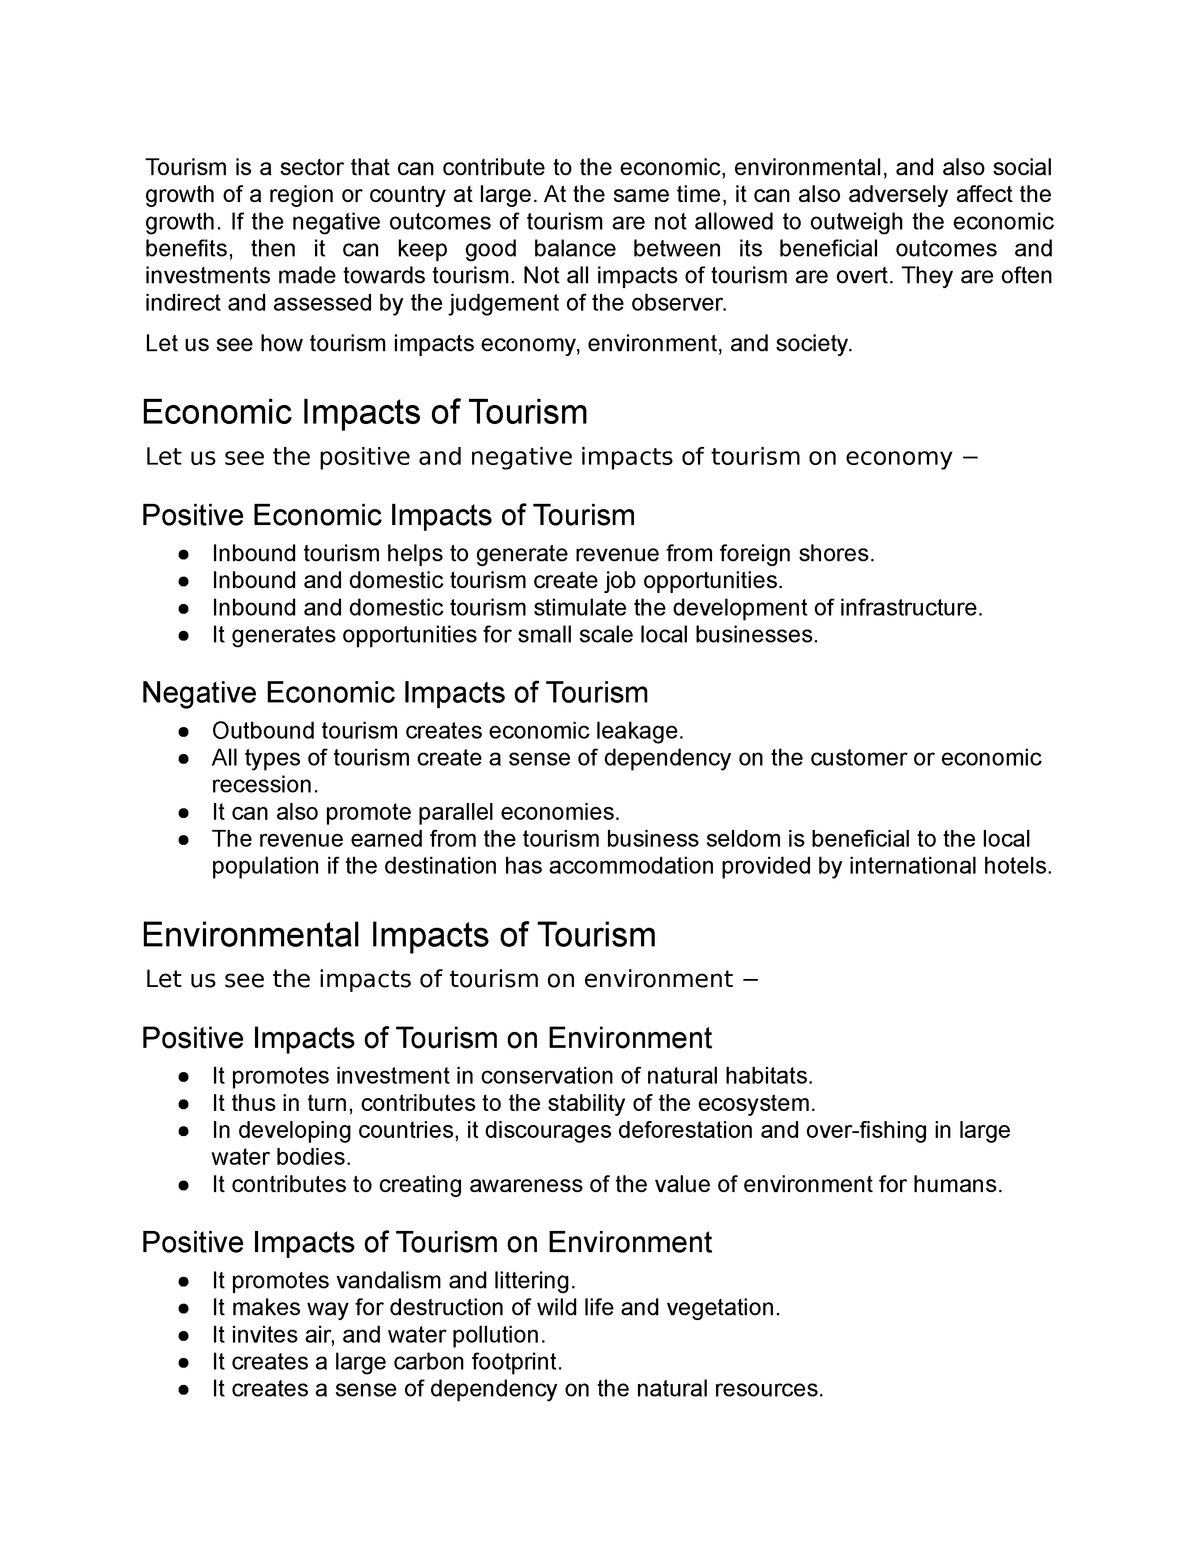 literature review on impacts of tourism